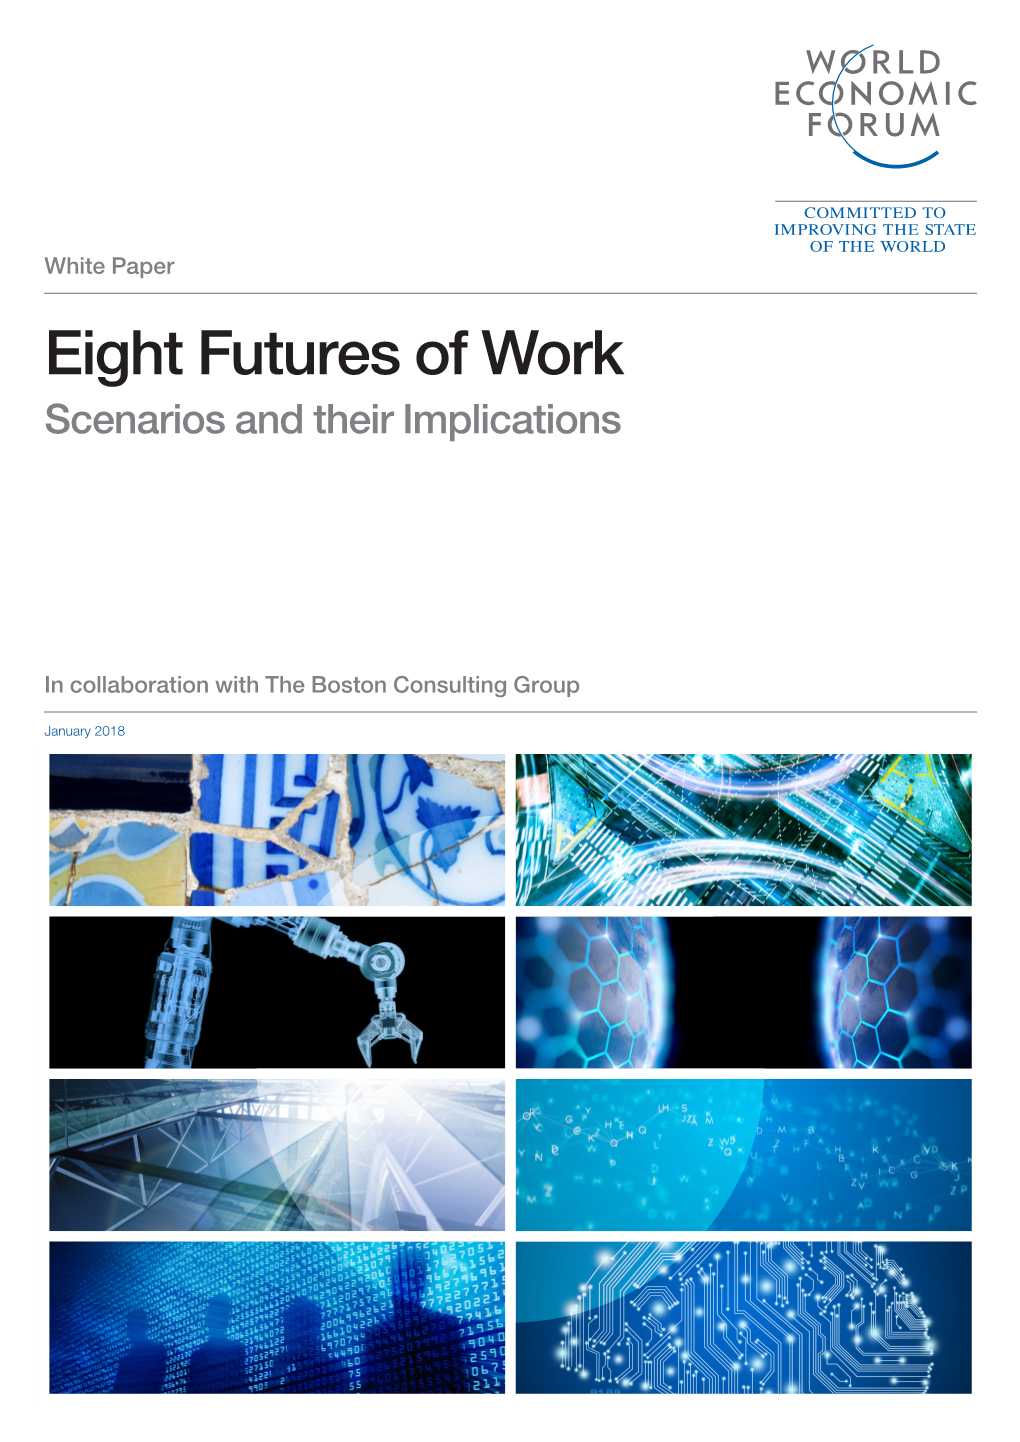 Eight Futures of Work: Scenarios and Their Implications